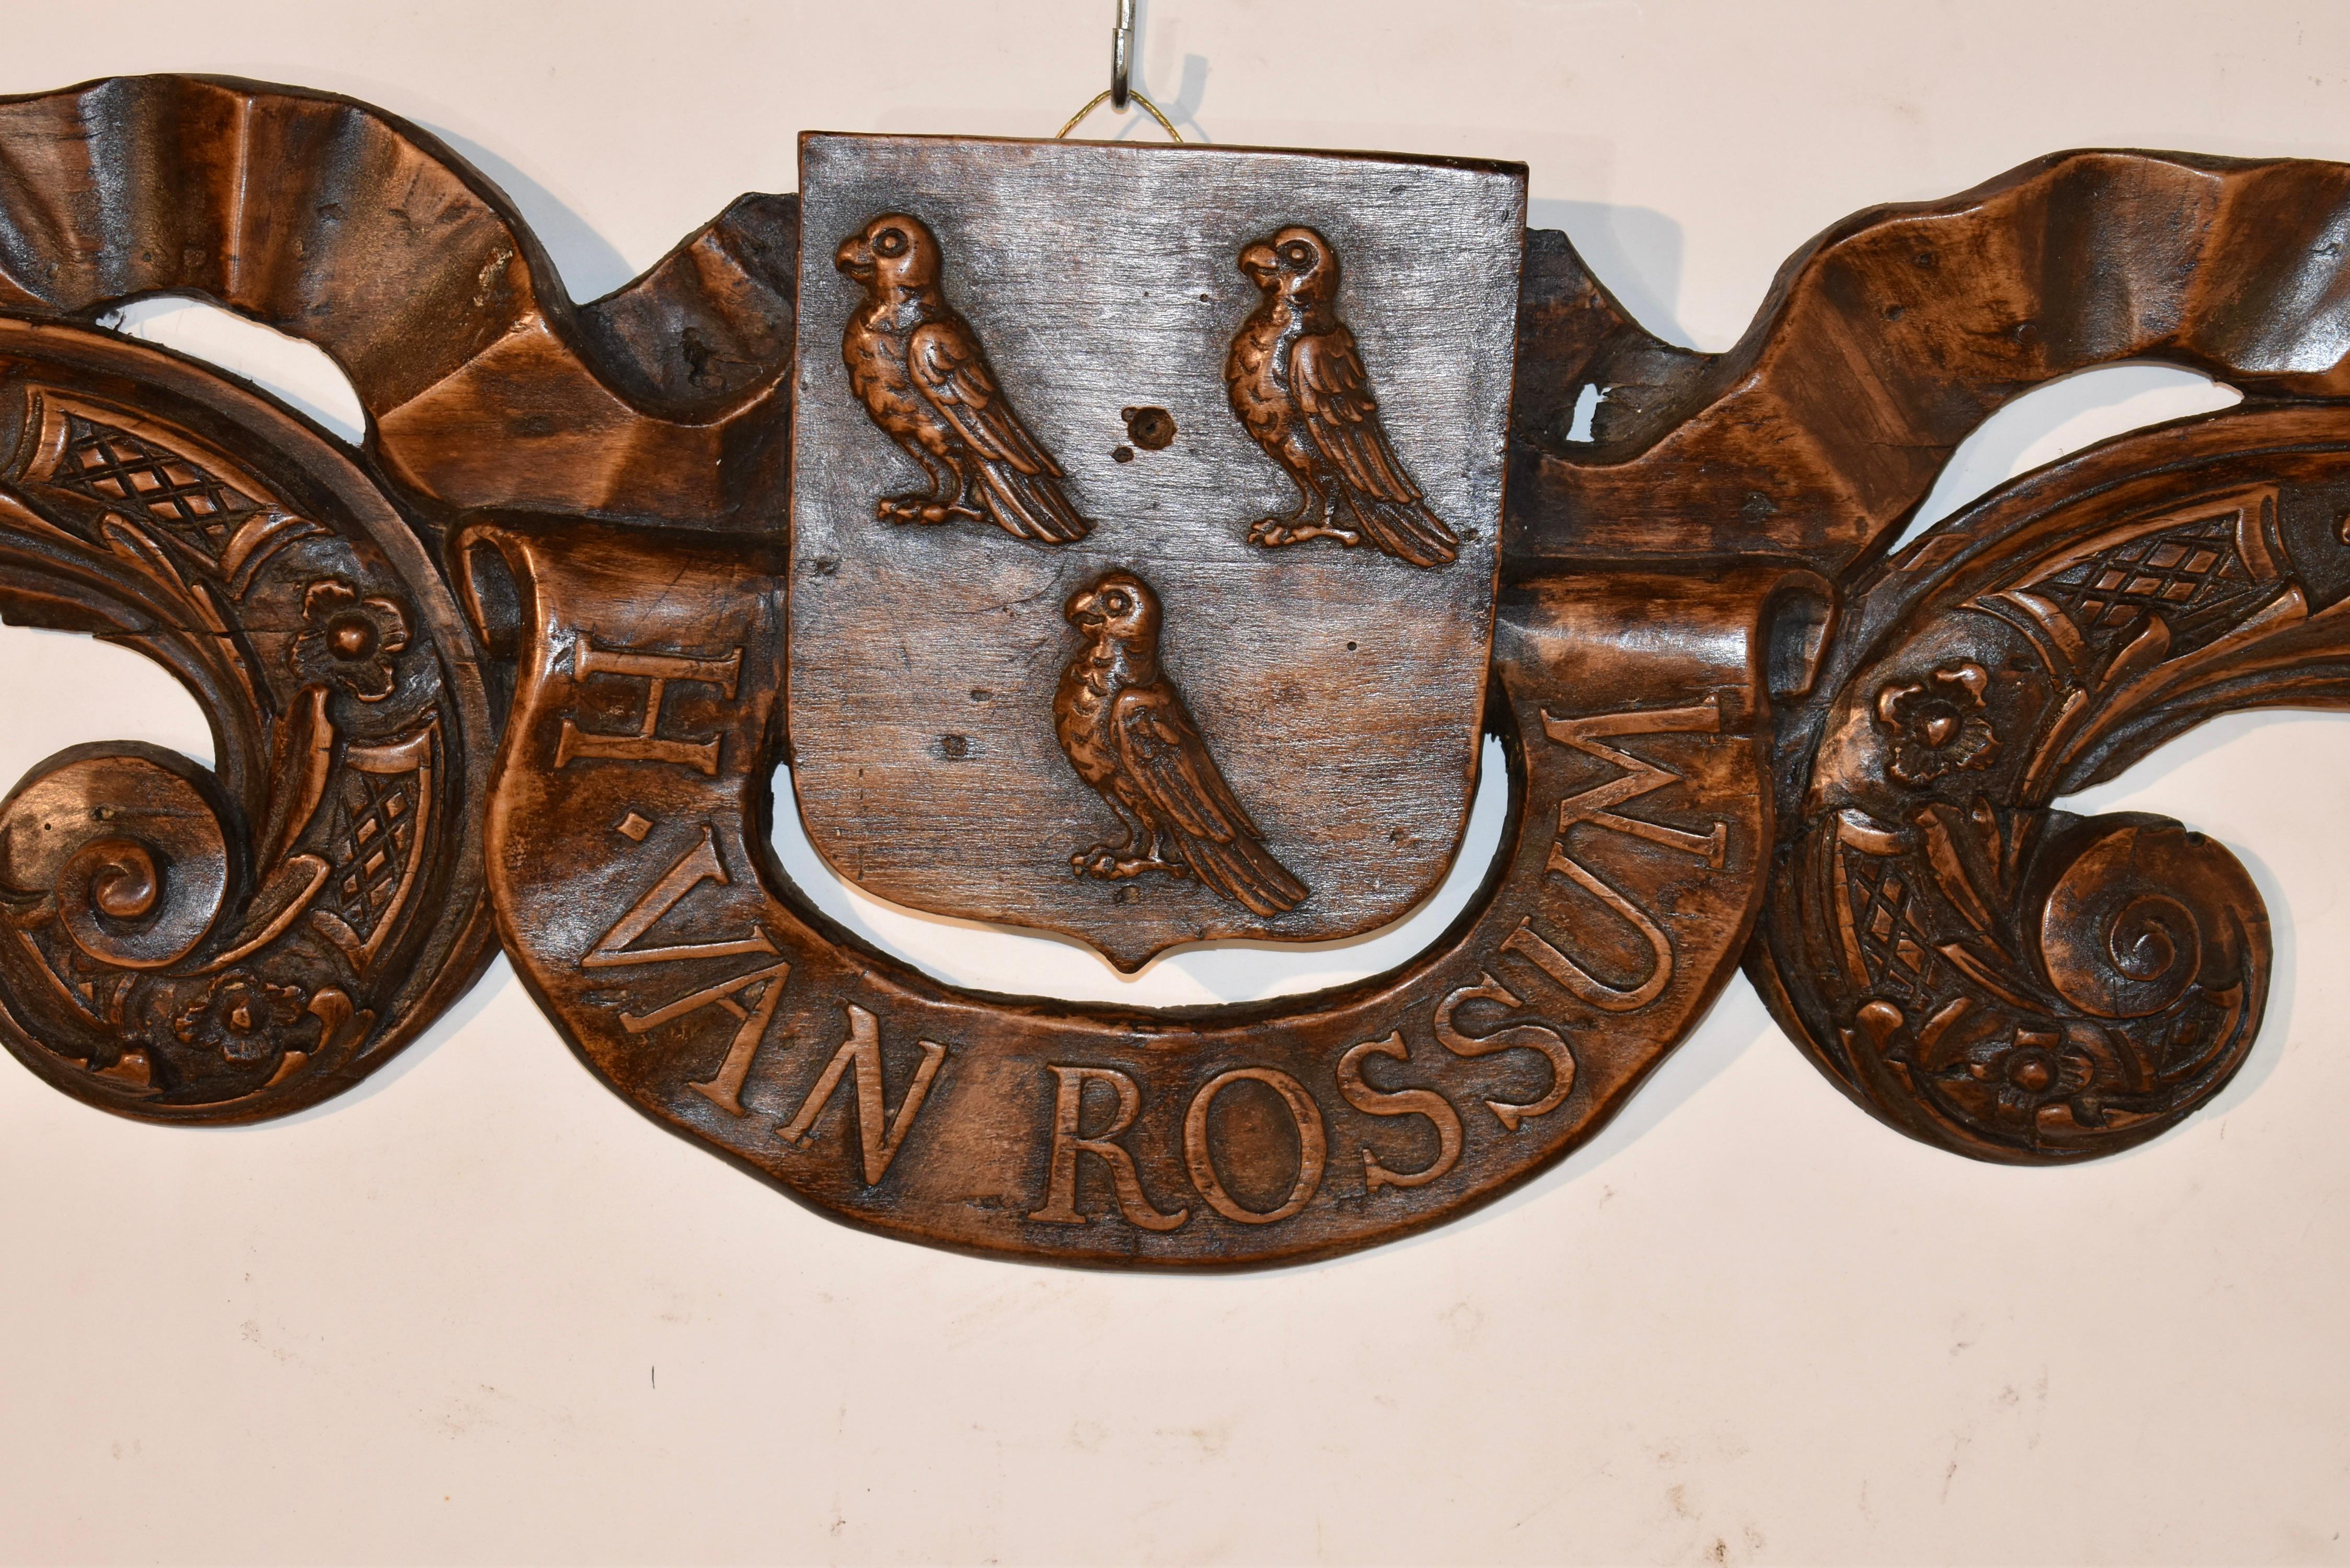 Part of a set of hand carved door surround that was from an 18th century house in the Netherlands.  The other part of the set is dated 1728.  The piece has carved moldings incorporated with carved ribbons including the family name of H. Van Rossum